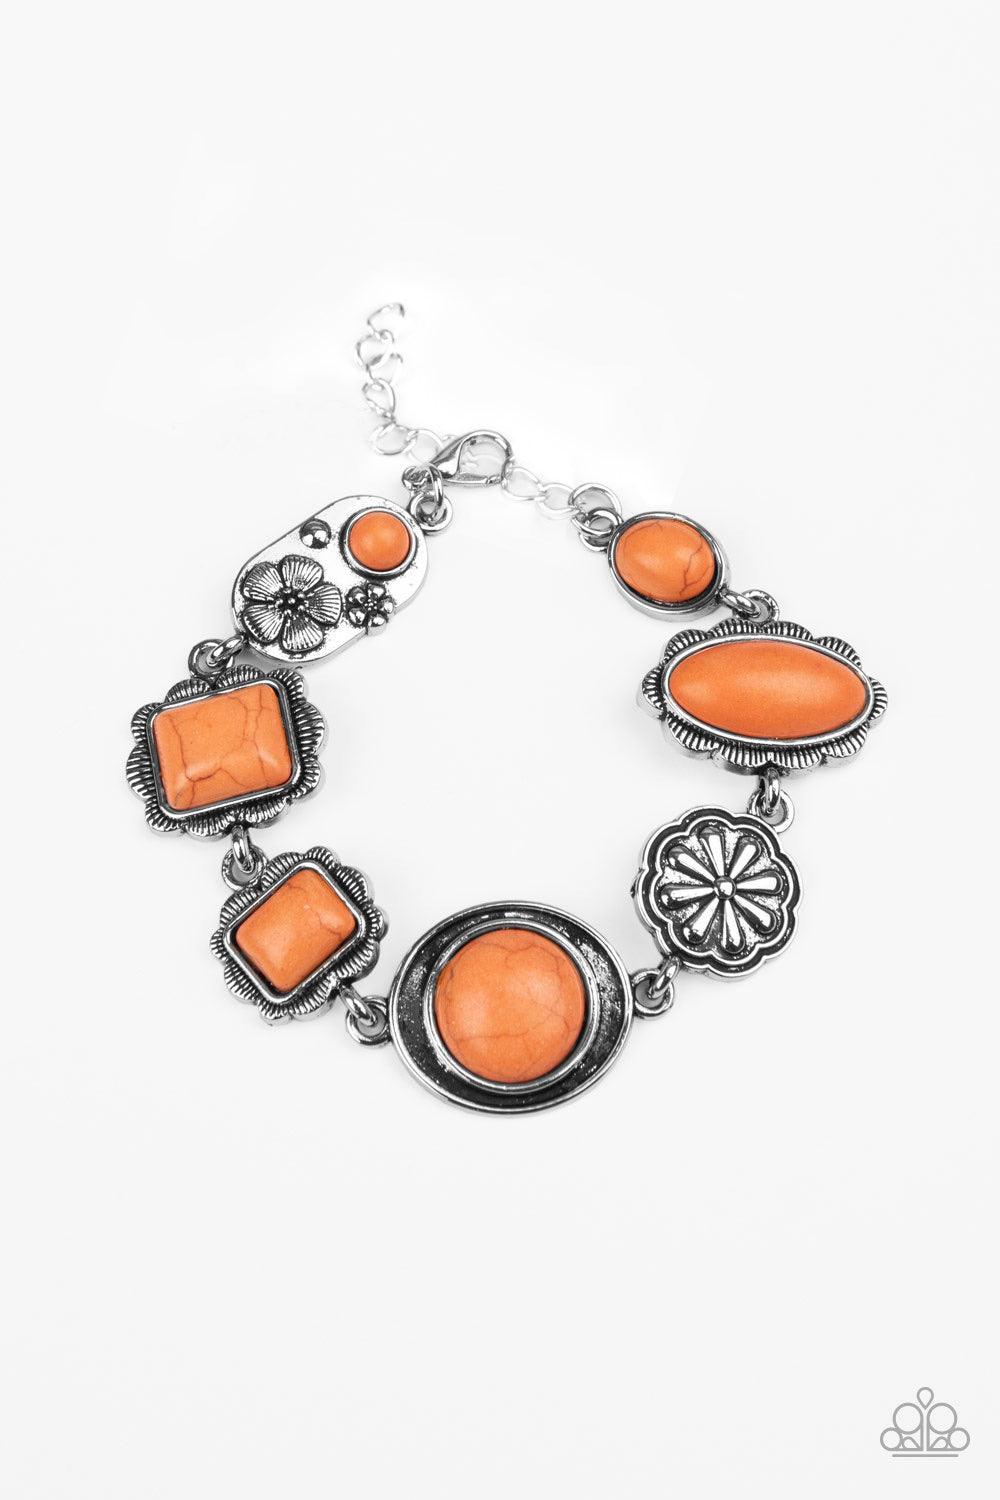 Paparazzi Accessories Gorgeously Groundskeeper - Orange a collection of antiqued silver frames link with a decorative floral charm around the wrist for a seasonal flair. Features an adjustable clasp closure. Jewelry